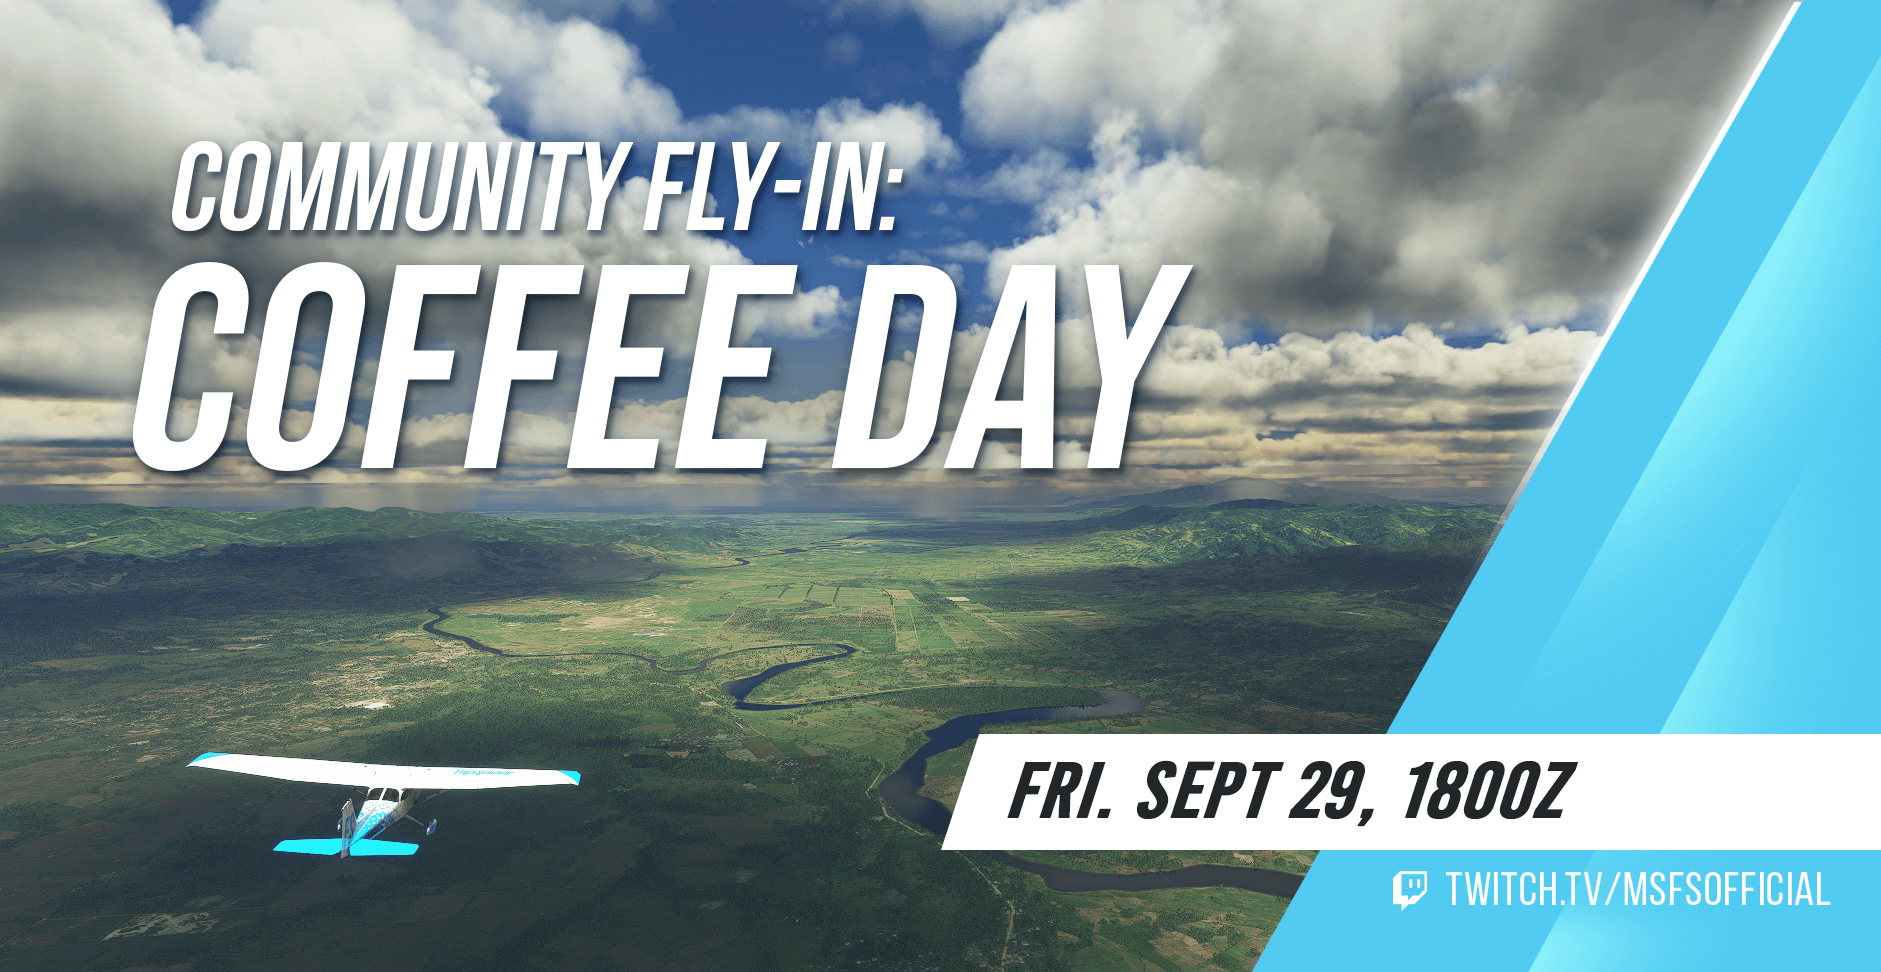 A plane flies above the Motagua Valley in Guatemala. Community Fly-In: Coffee Day. Join us on Friday, September 29th at 1800Z. We'll be streaming at twitch.tv/msfsofficial.